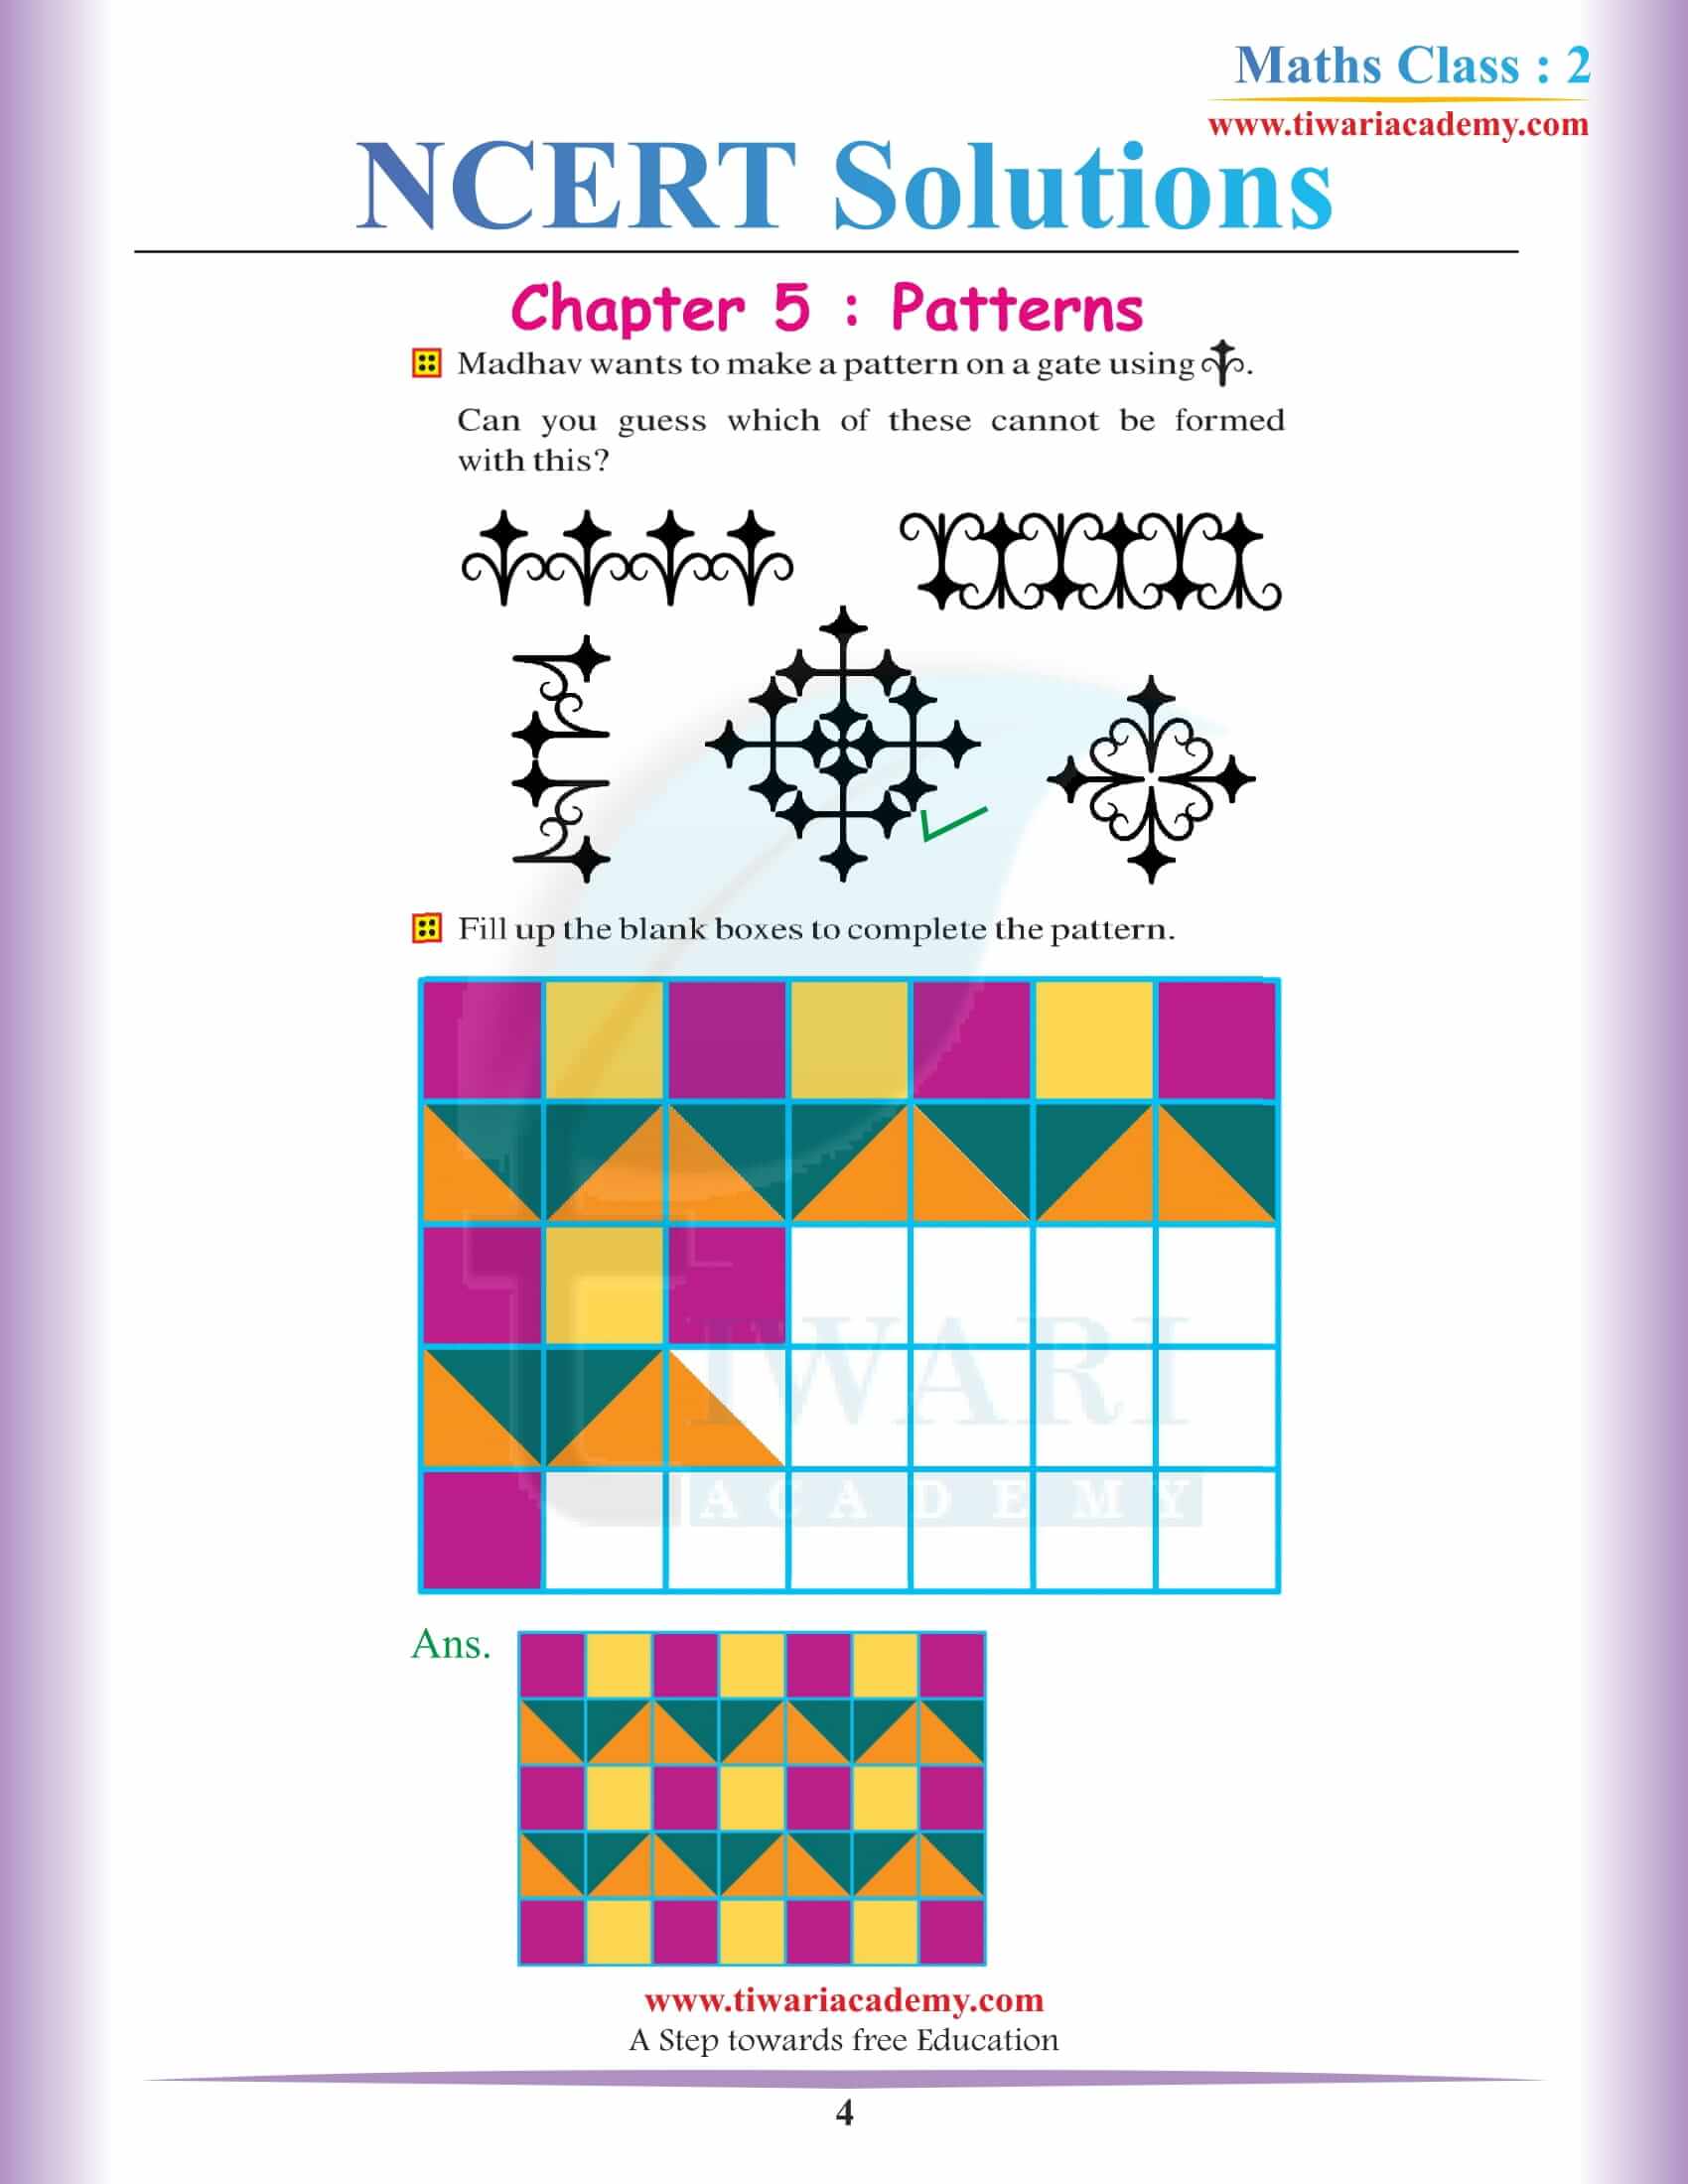 NCERT Solutions for Class 2 Maths Chapter 5 Patterns free download